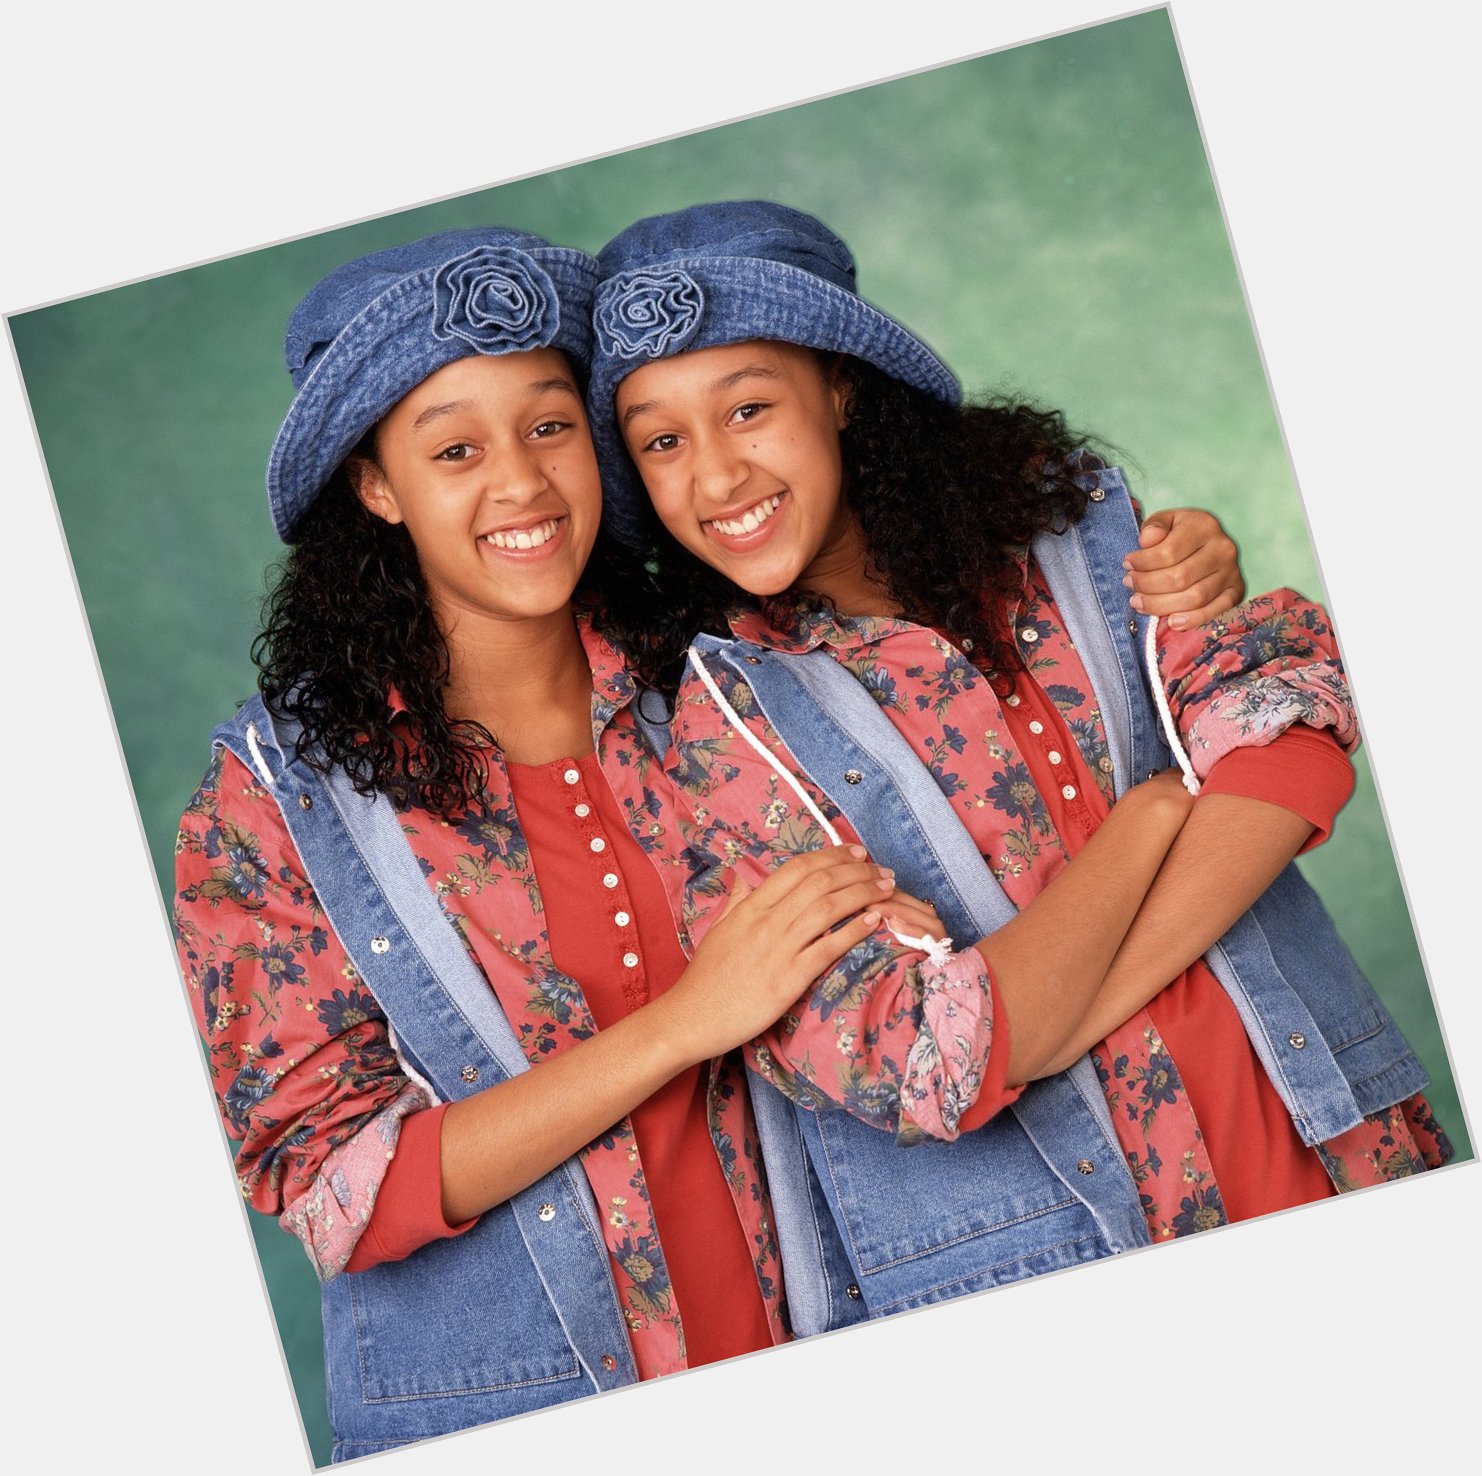  and say Happy Birthday the two and only Tia and Tamera Mowry  